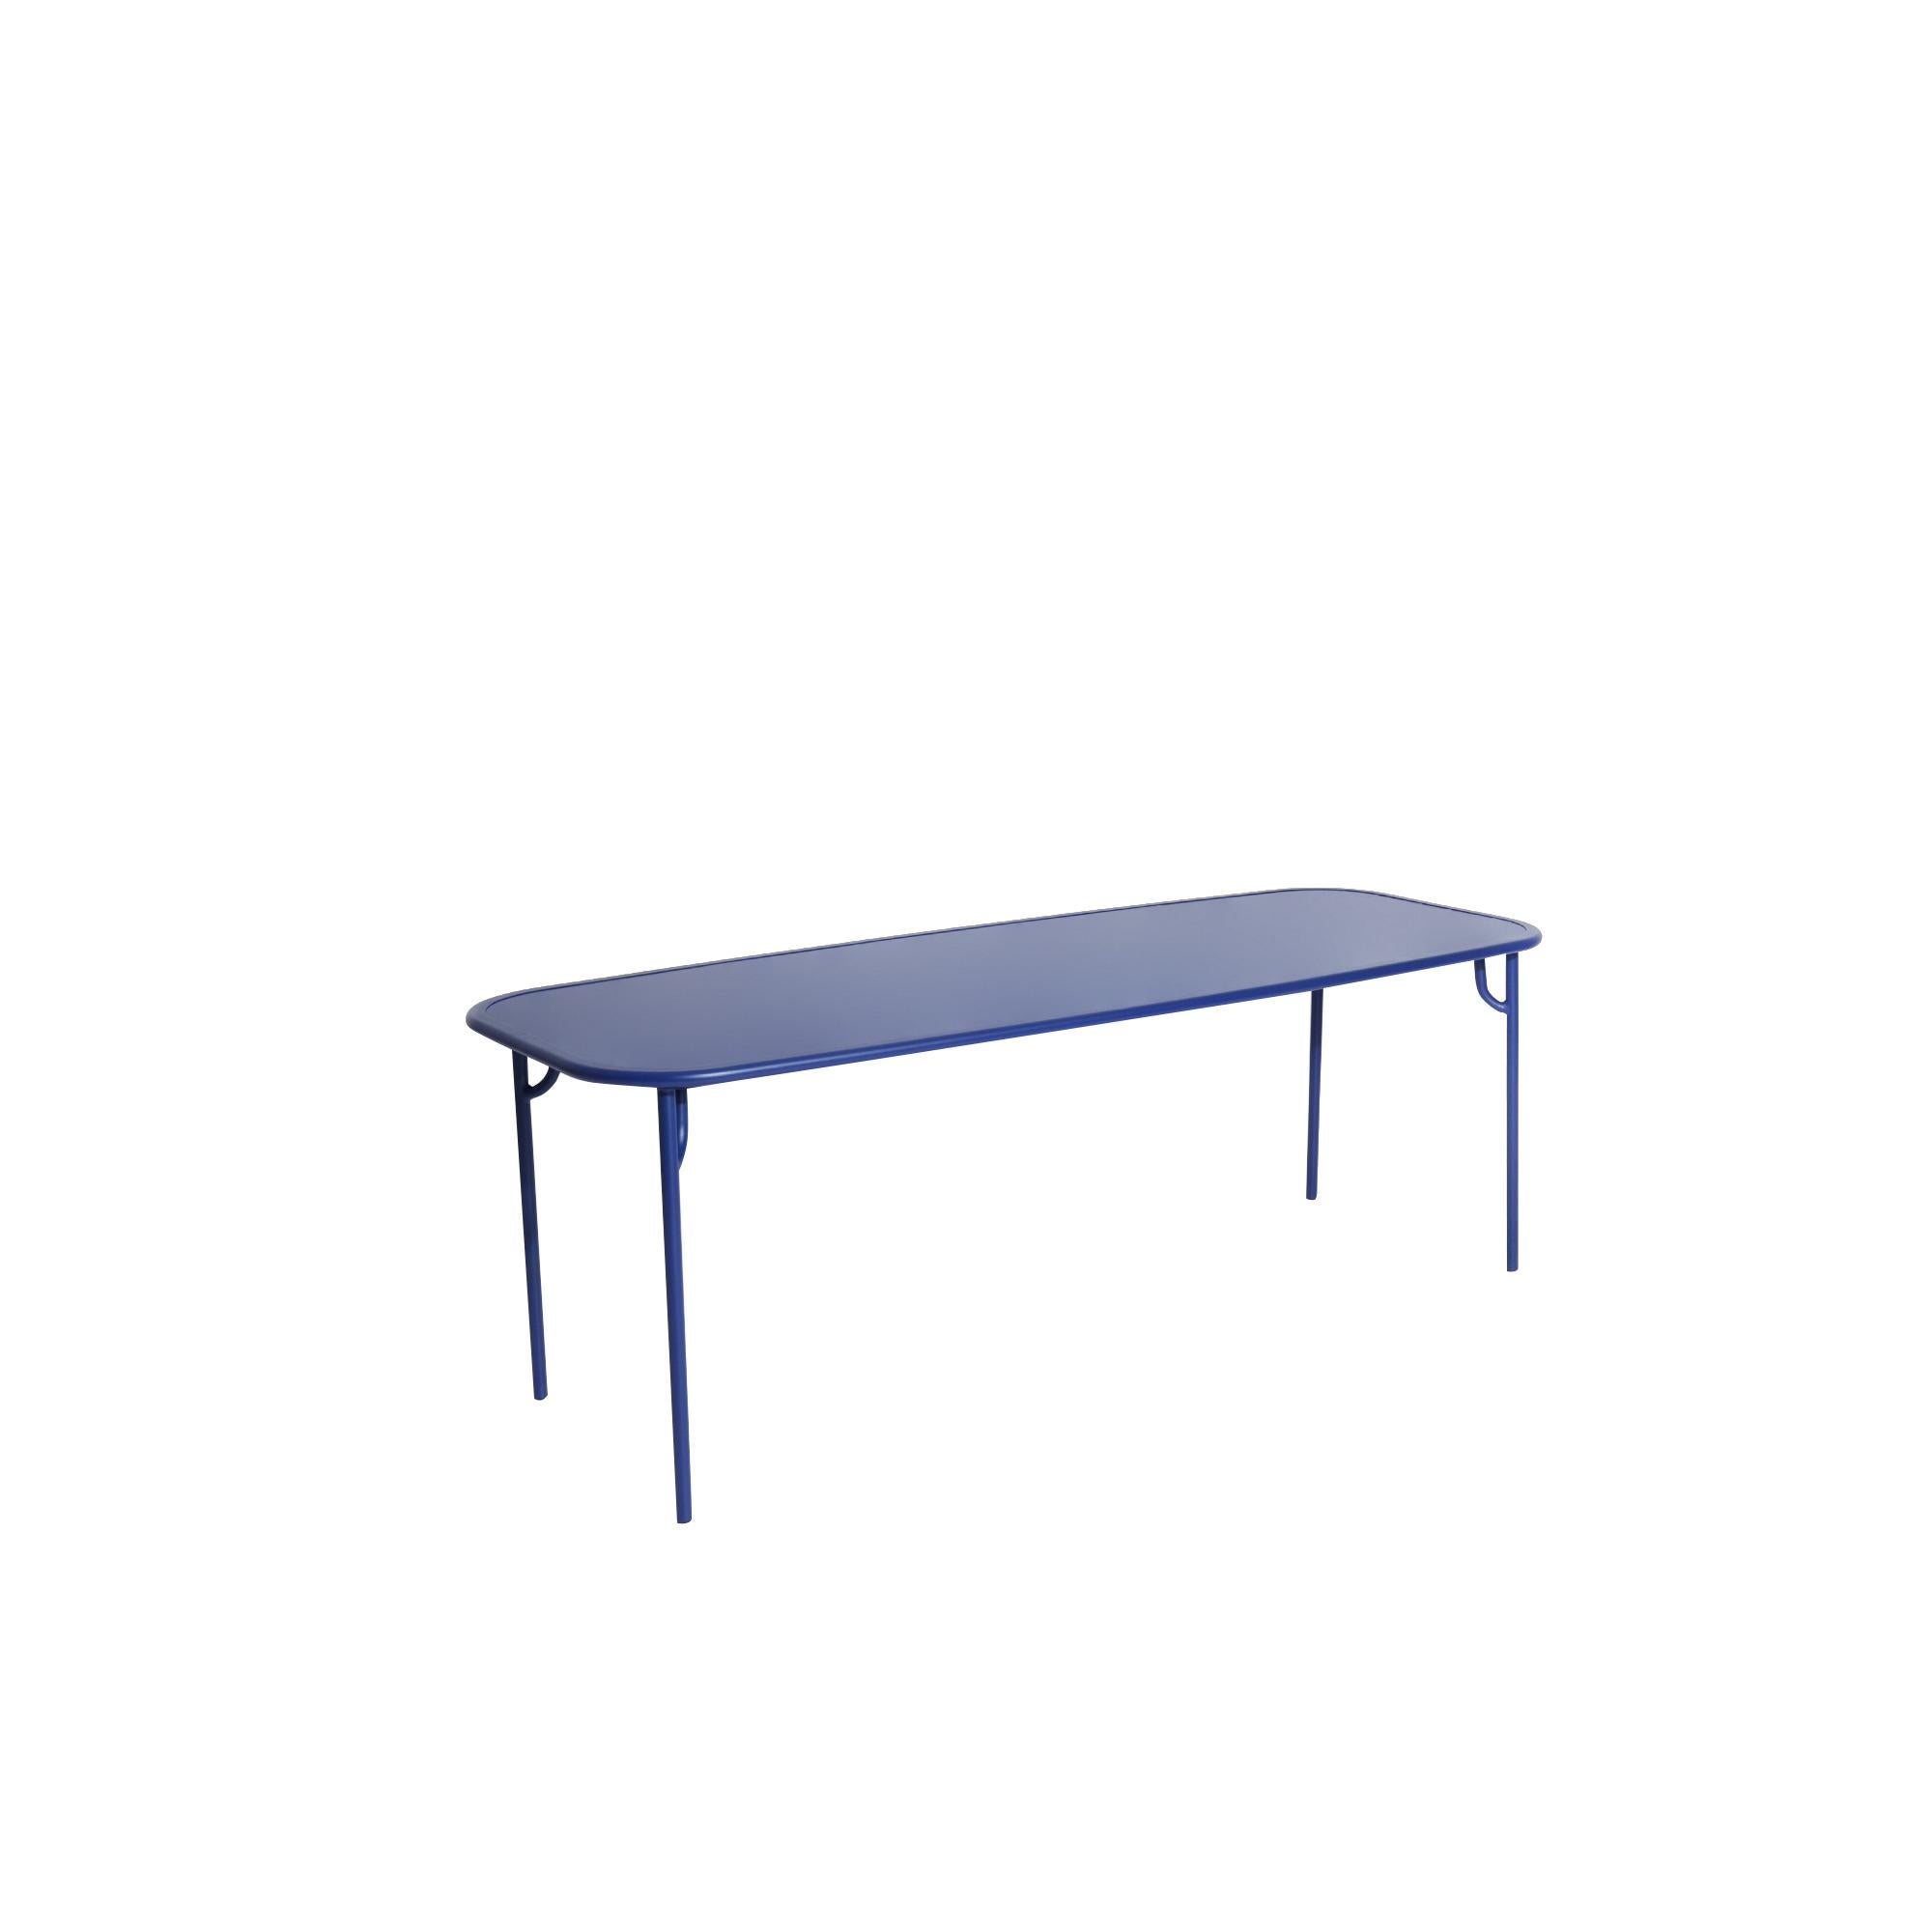 Petite Friture Week-End Large Plain Rectangular Dining Table in Blue Aluminium by Studio BrichetZiegler, 2017

The week-end collection is a full range of outdoor furniture, in aluminium grained epoxy paint, matt finish, that includes 18 functions